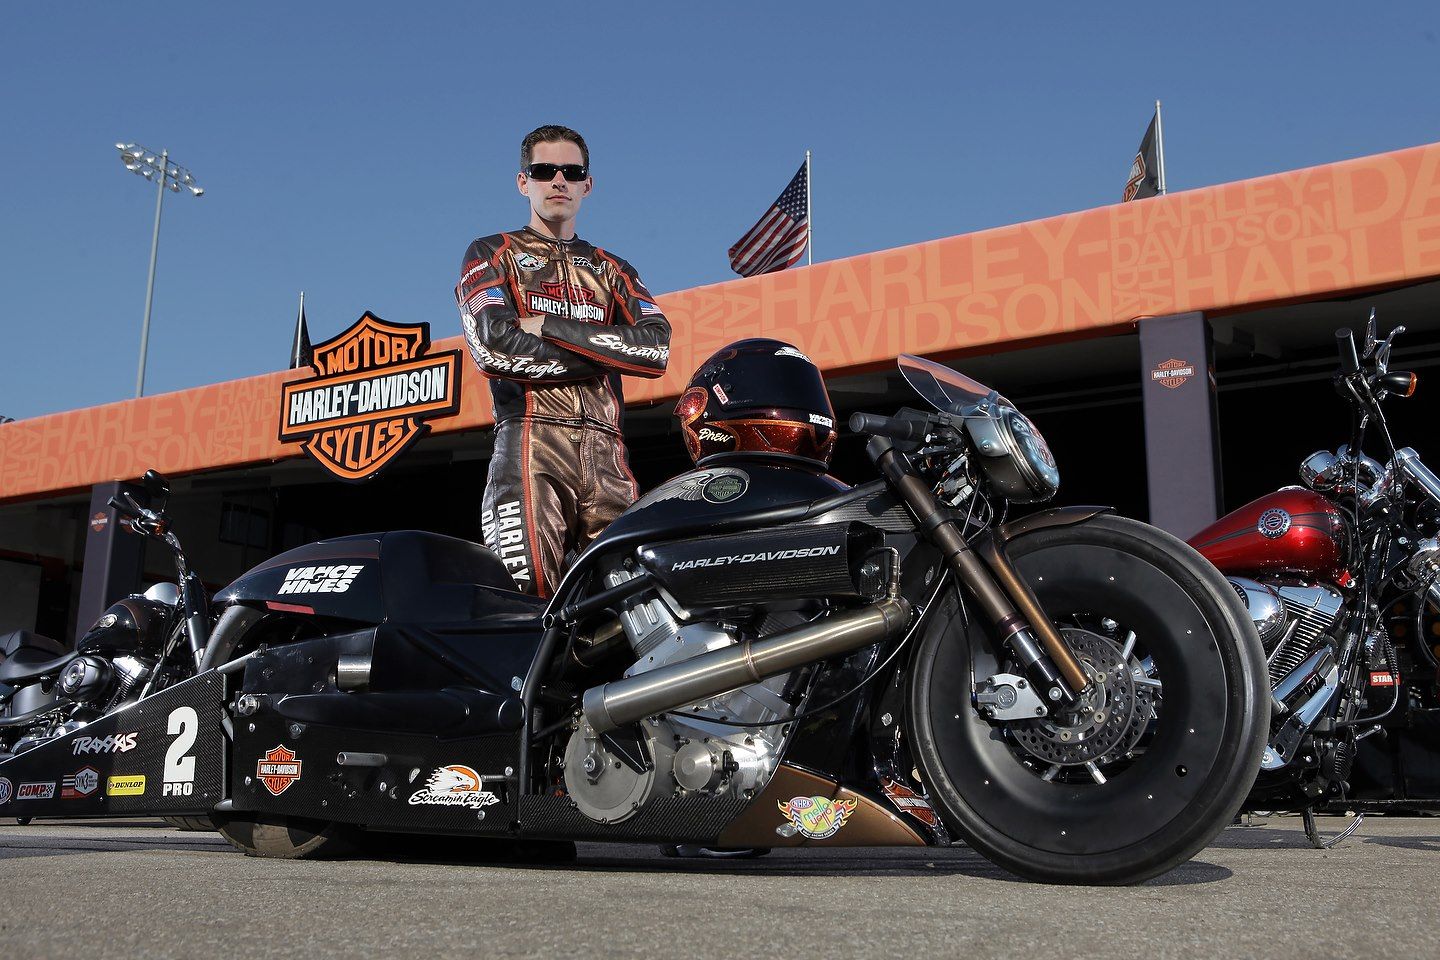 Harley Davidson racer with race bikes - speed and style on the track